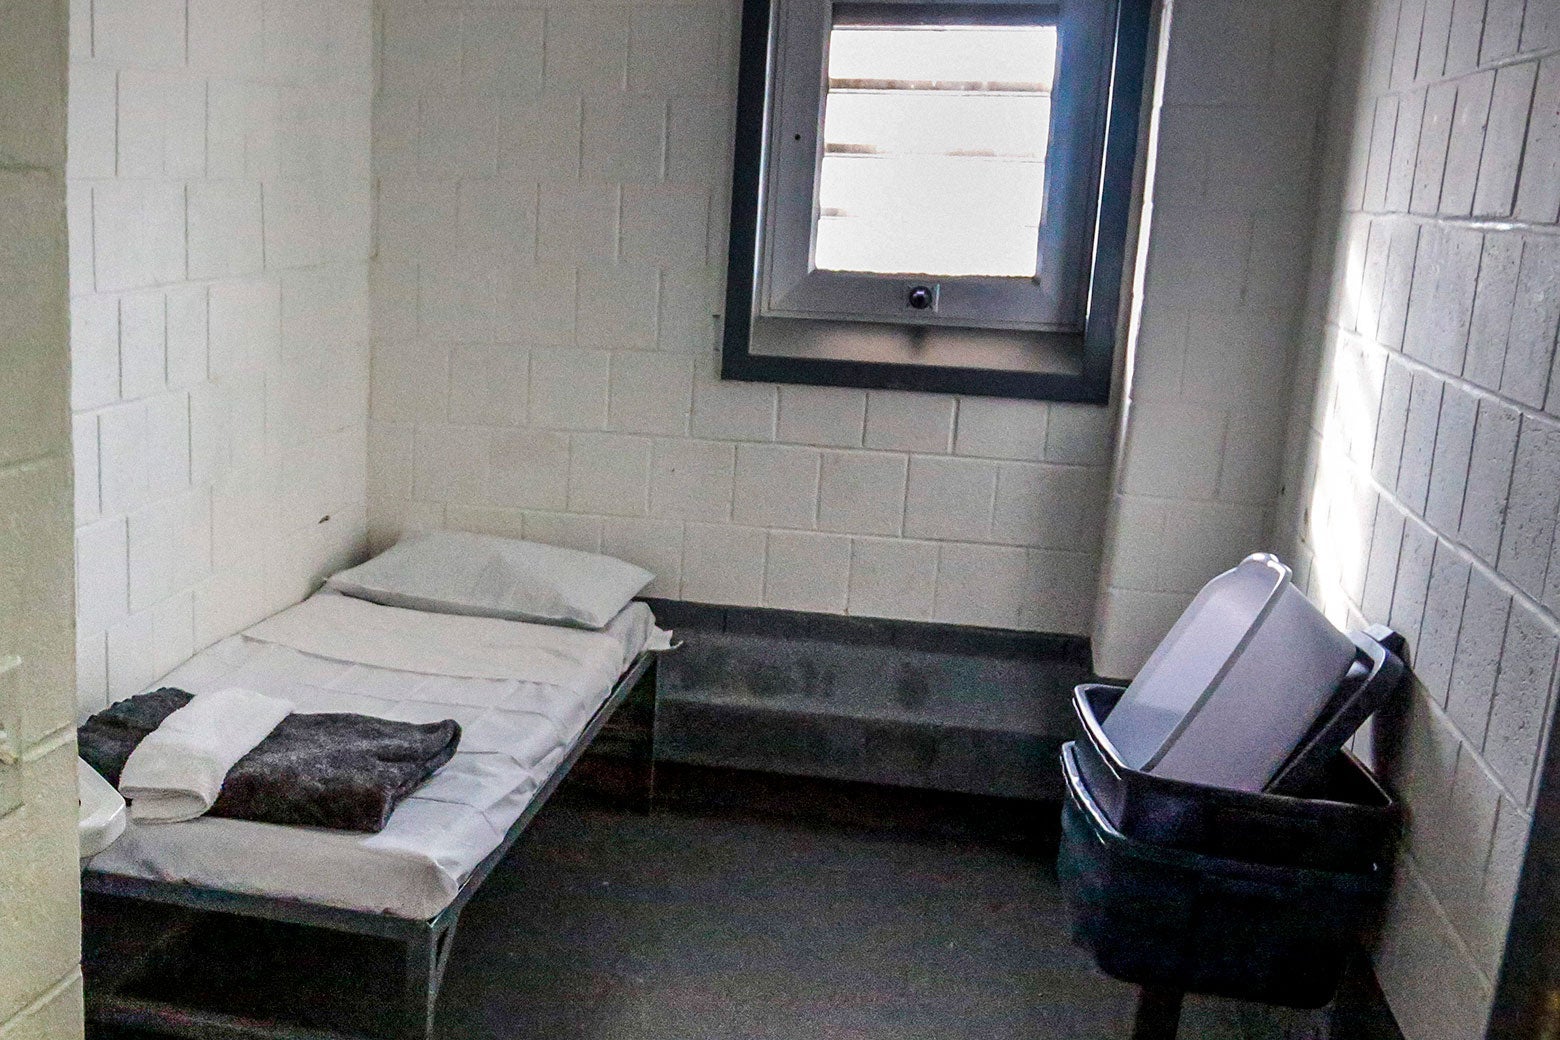 A tiny jail cell with a cot on one side and some plastic tubs on the other.